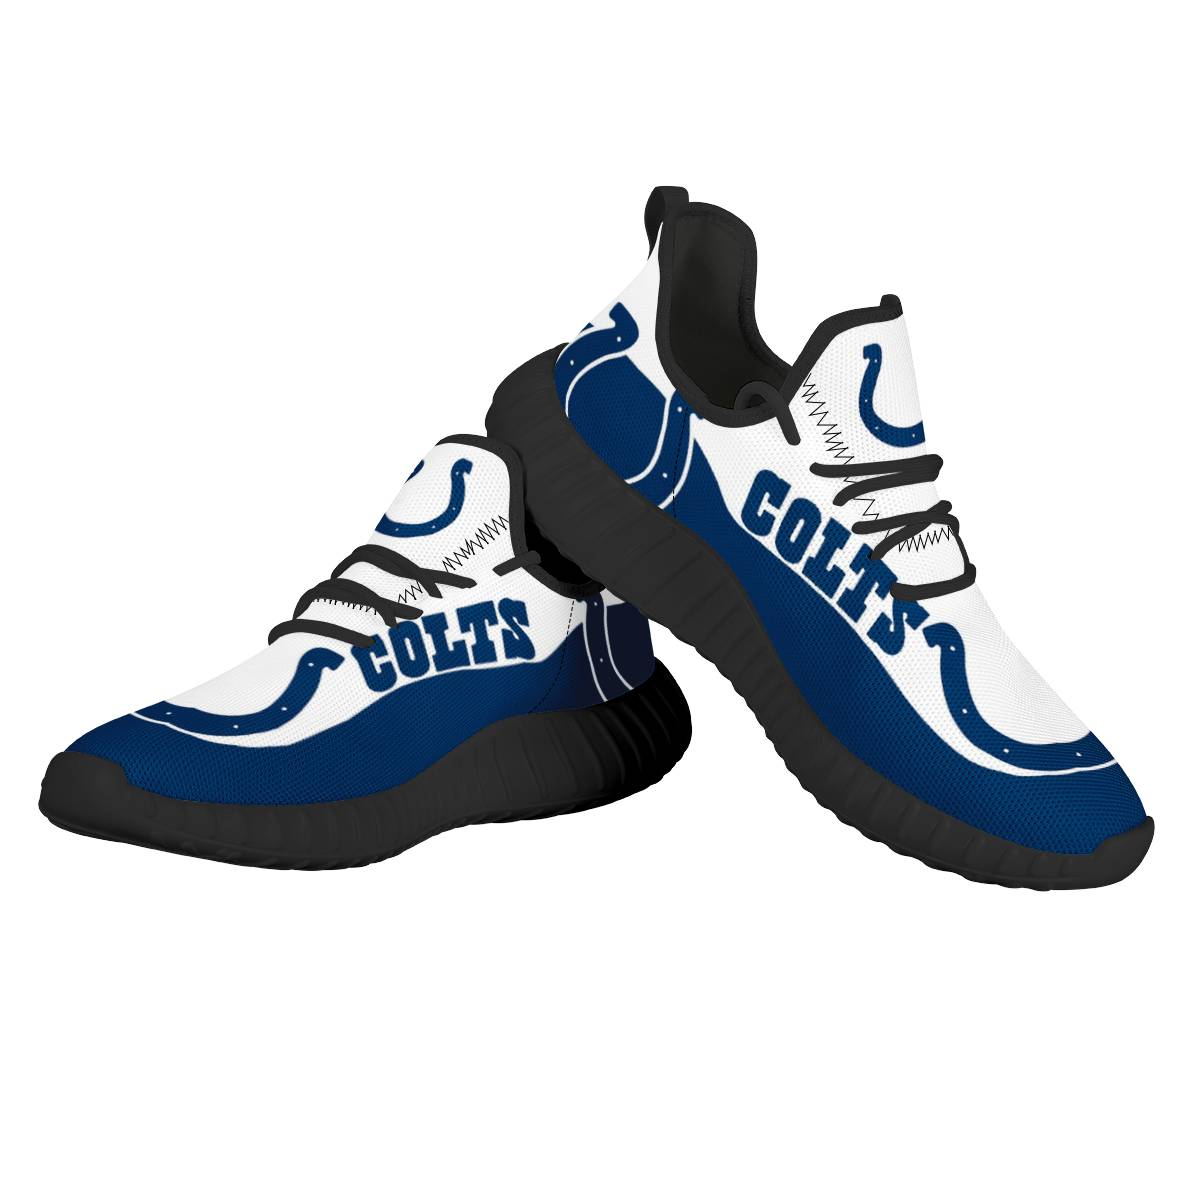 Men's NFL Indianapolis Colts Mesh Knit Sneakers/Shoes 003